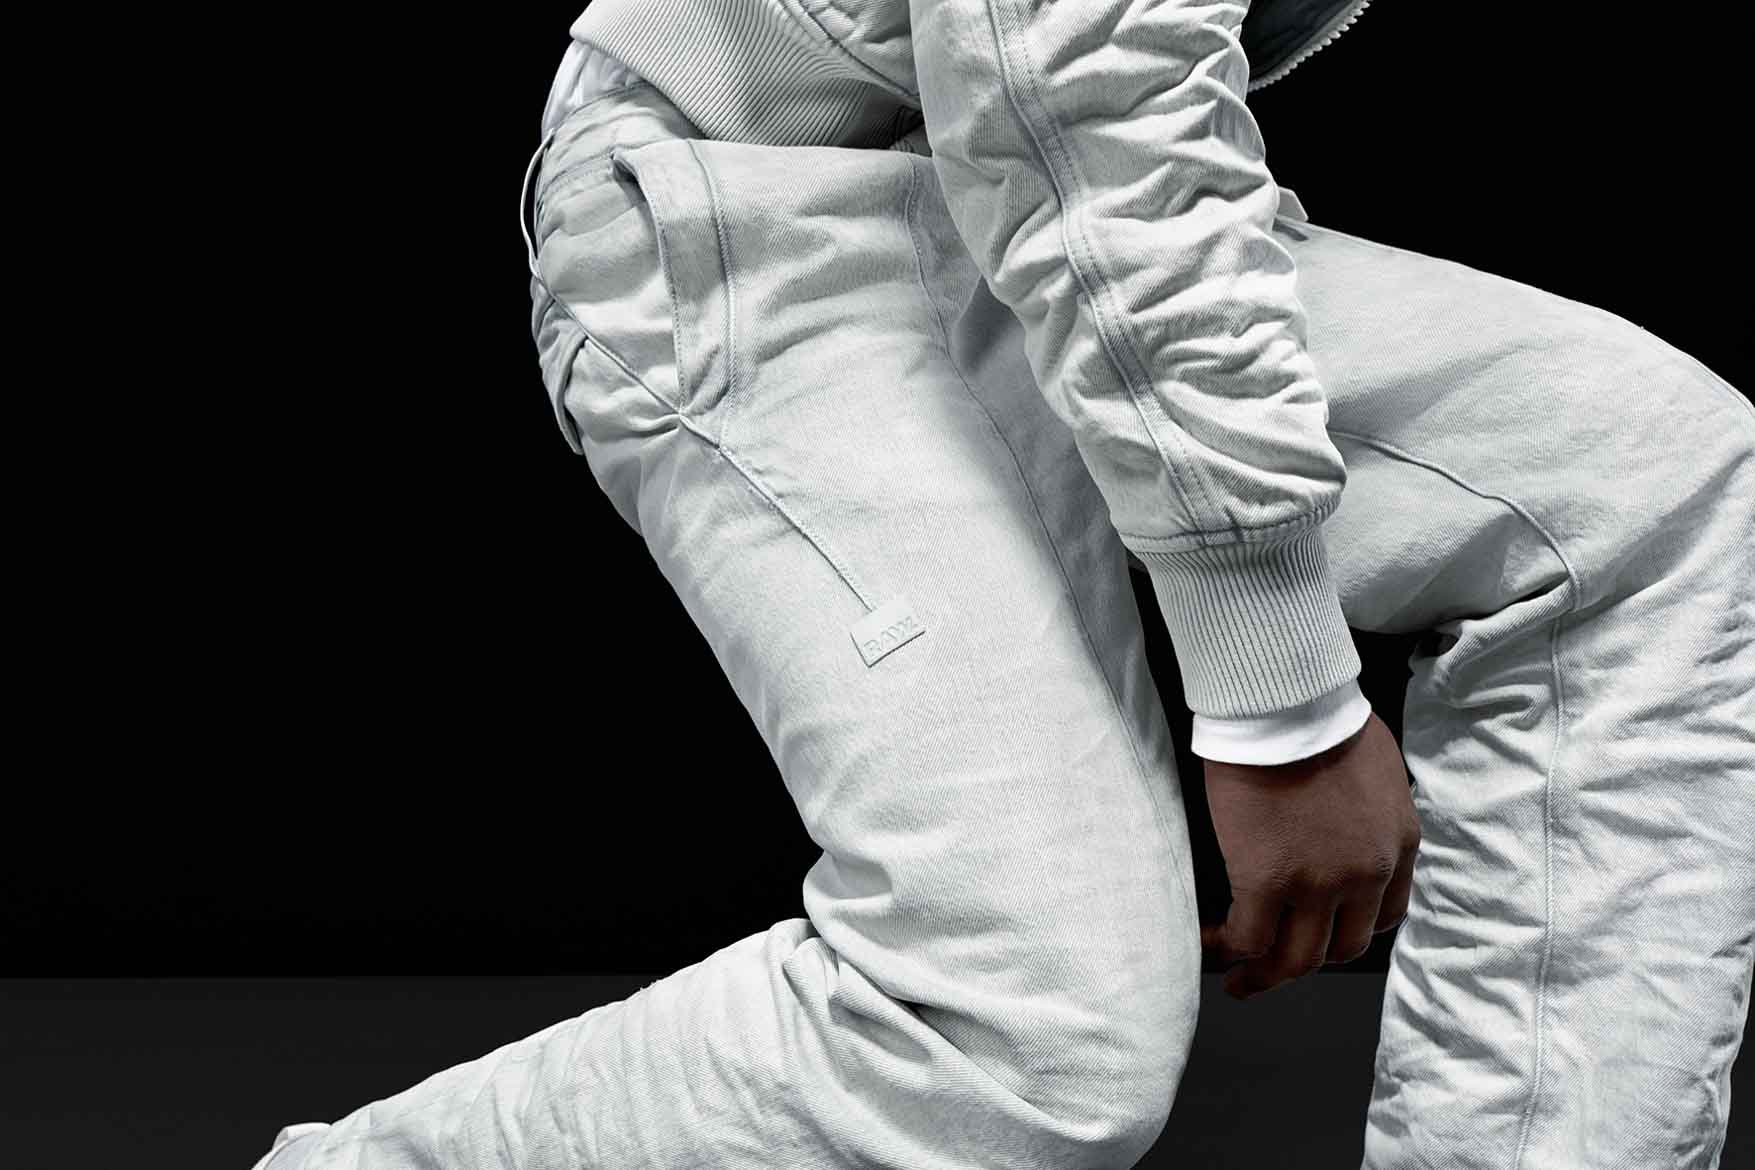 G-STAR-RAW-RESEARCH-II-BY-AITOR-THROUP-8